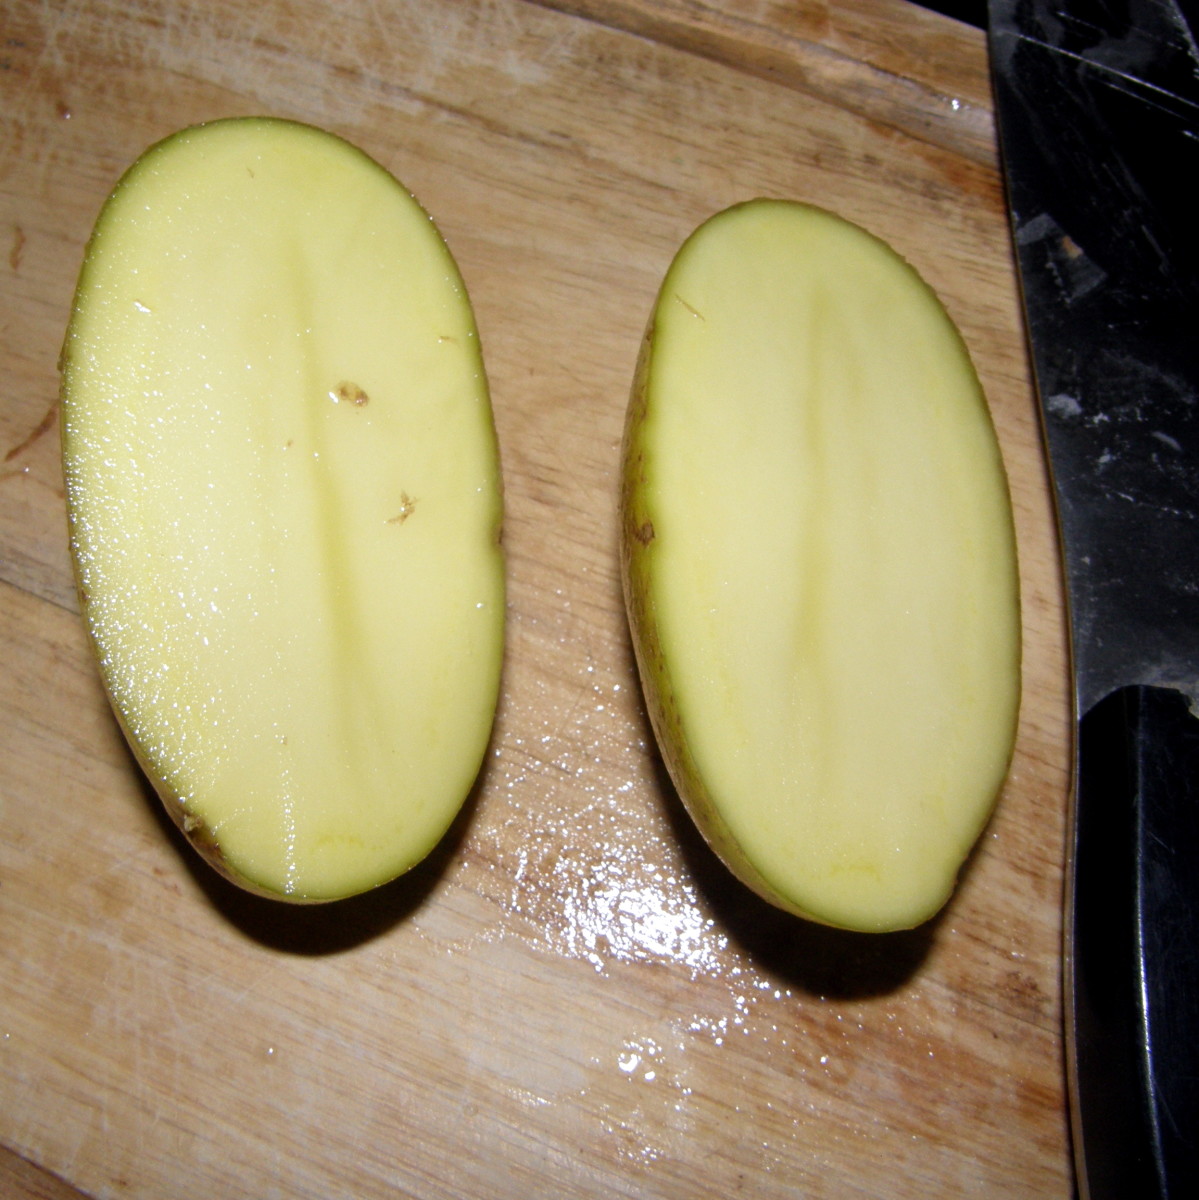 Start by slicing the potatoes in half.  Then slice each half down the middle and then cut into chunks.